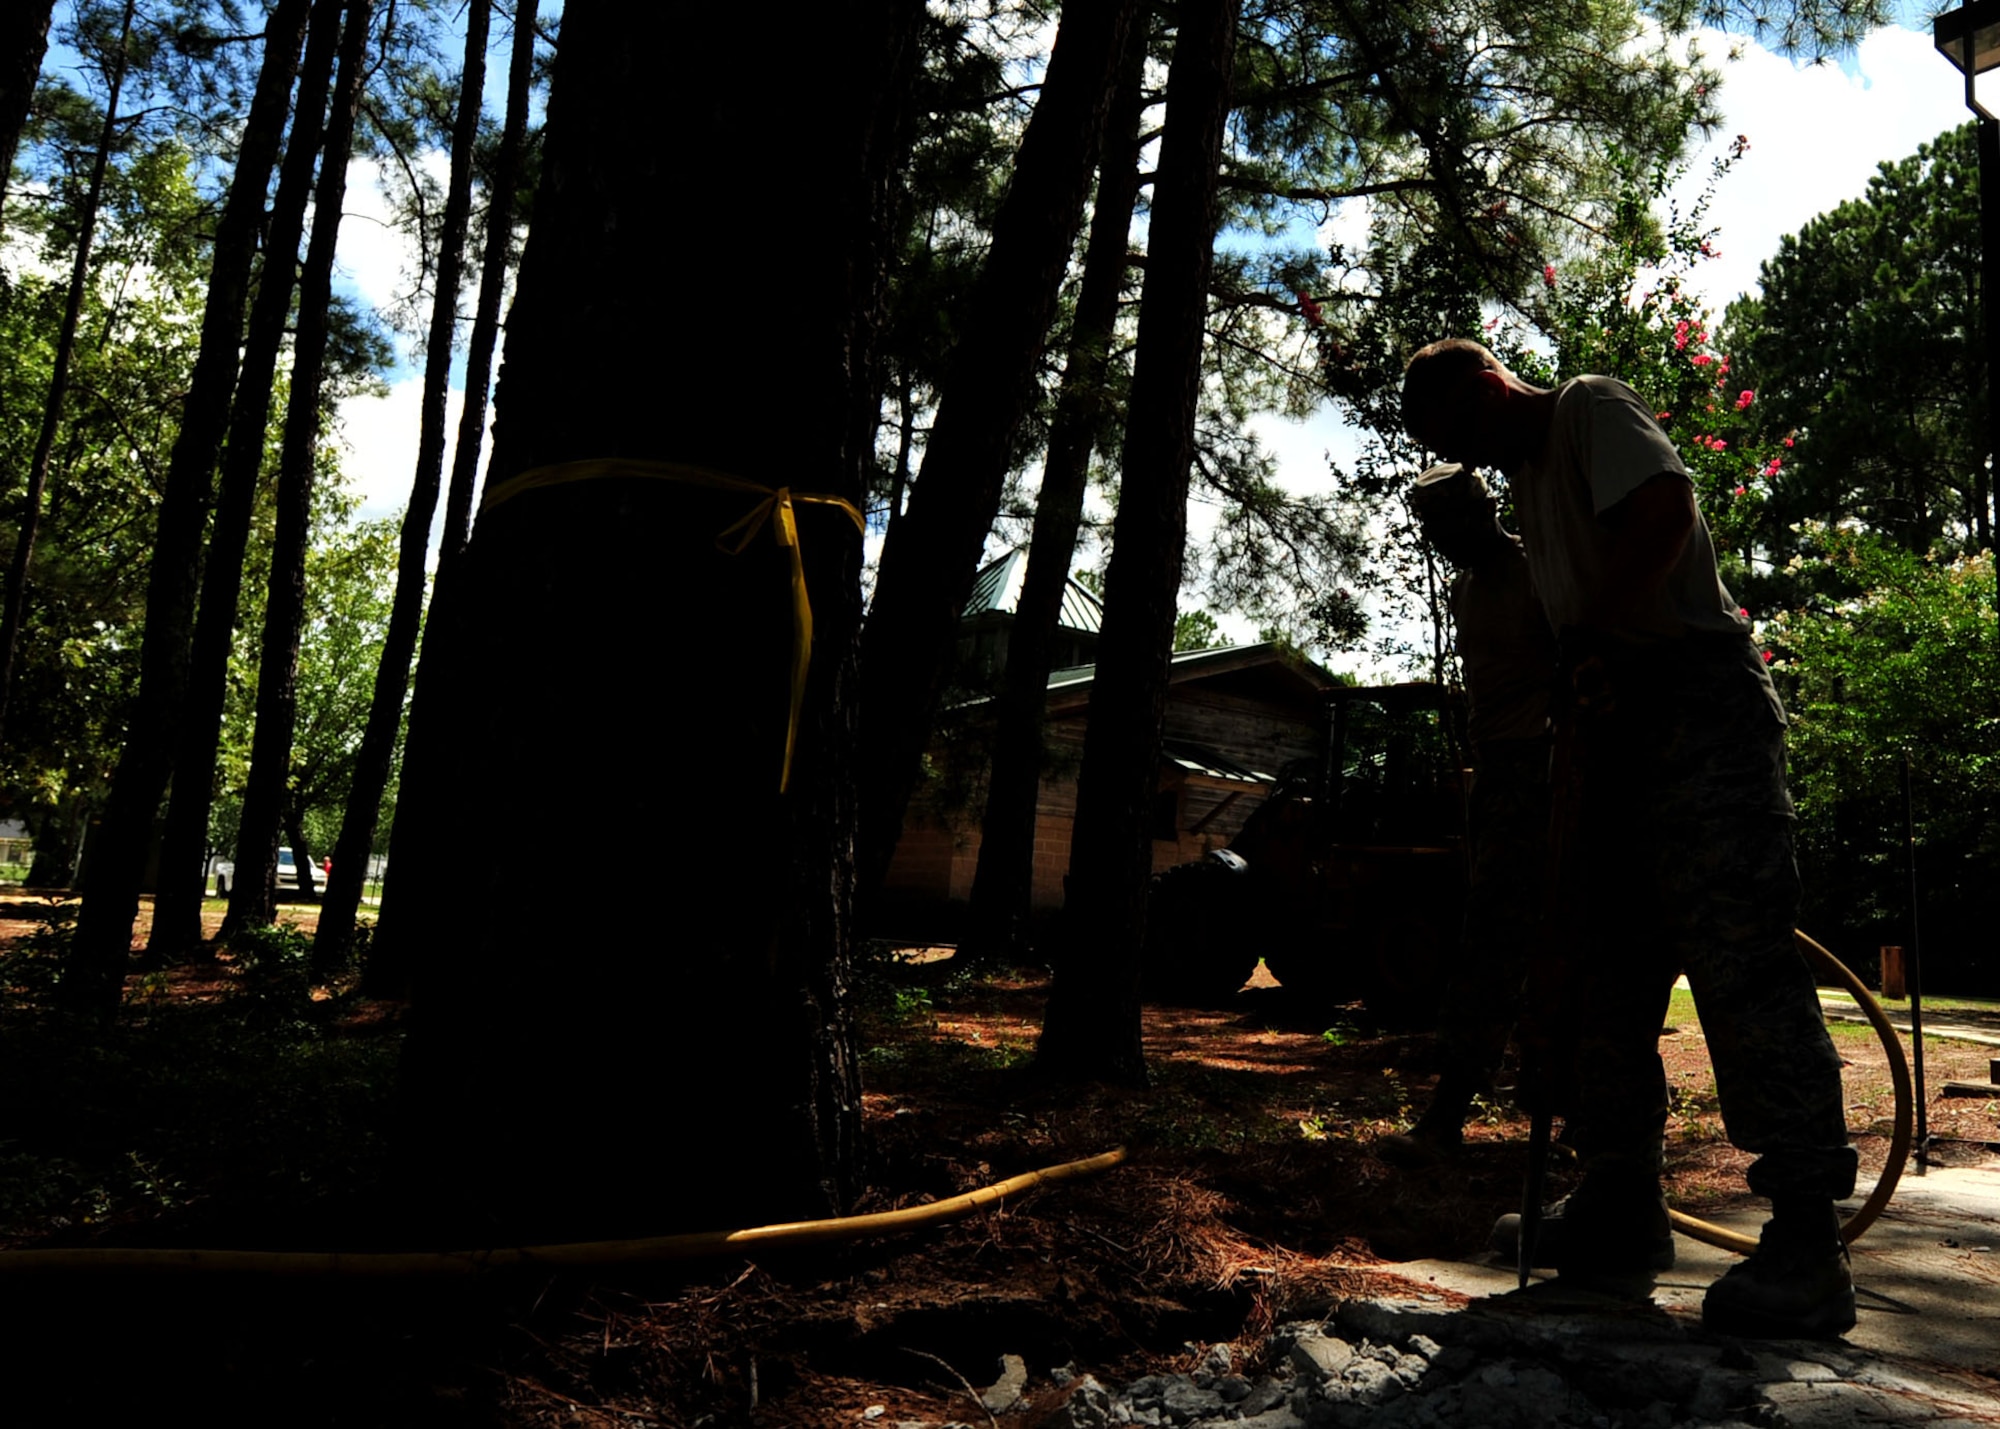 U.S. Airmen assigned to the 20th Civil Engineer Squadron worked as a team to demolish an uneven concrete sidewalk upheaved by tree roots at Shaw Air Force Base, S.C., Aug. 10, 2017. The pavement and construction equipment Airmen,  also known as “Dirt Boyz,” used tools such as a pneumatic 30-pound jack hammer and pickaxe to remove approximately five cubic yards of concrete to make way for a new path. (U.S. Air Force photos by Airman 1st Class Kathryn R.C. Reaves)